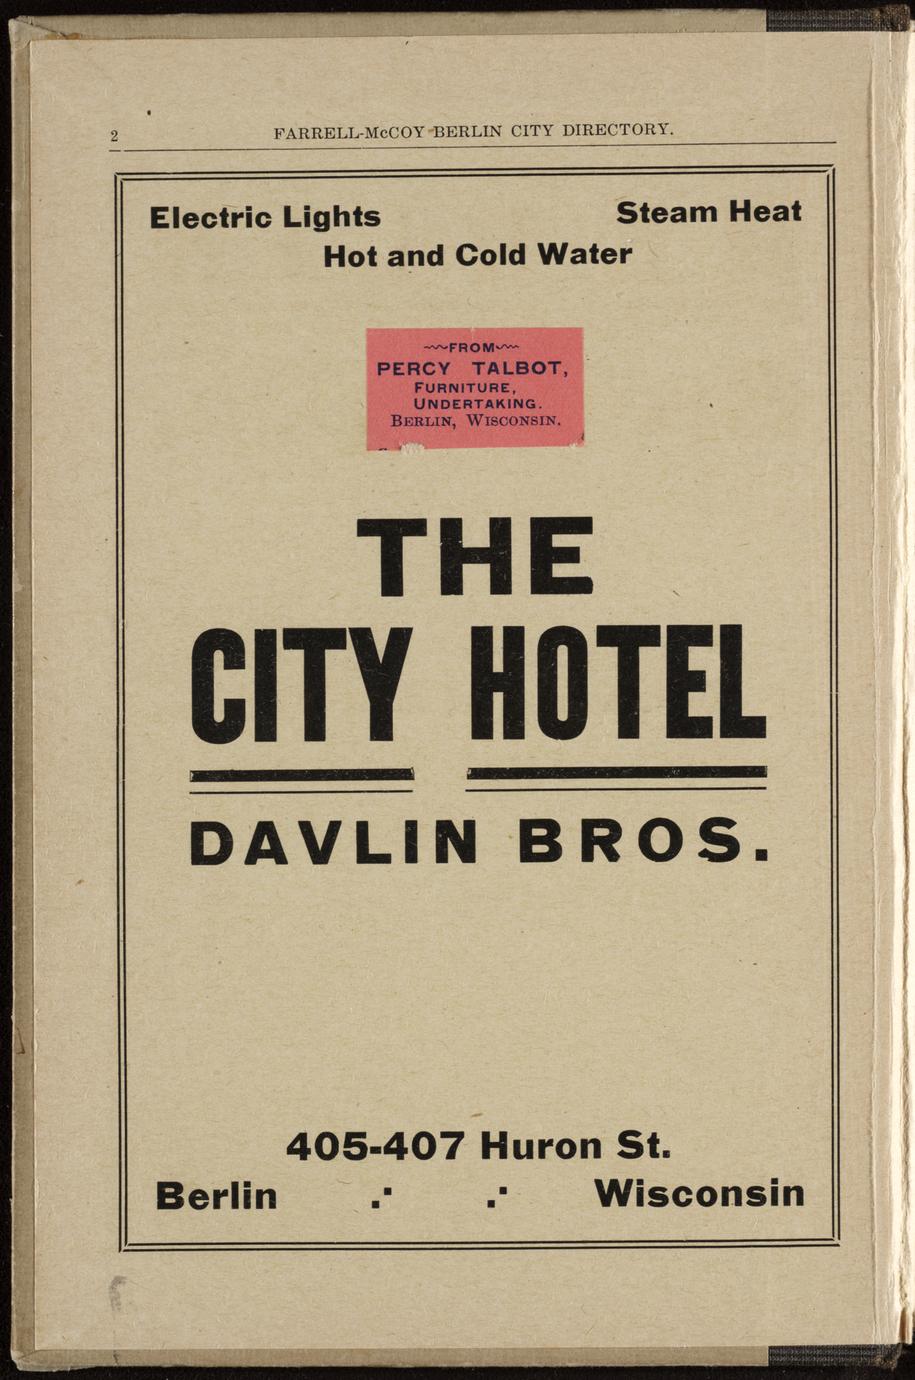 Farrell-McCoys Berlin city directory, 1915-1916 picture pic